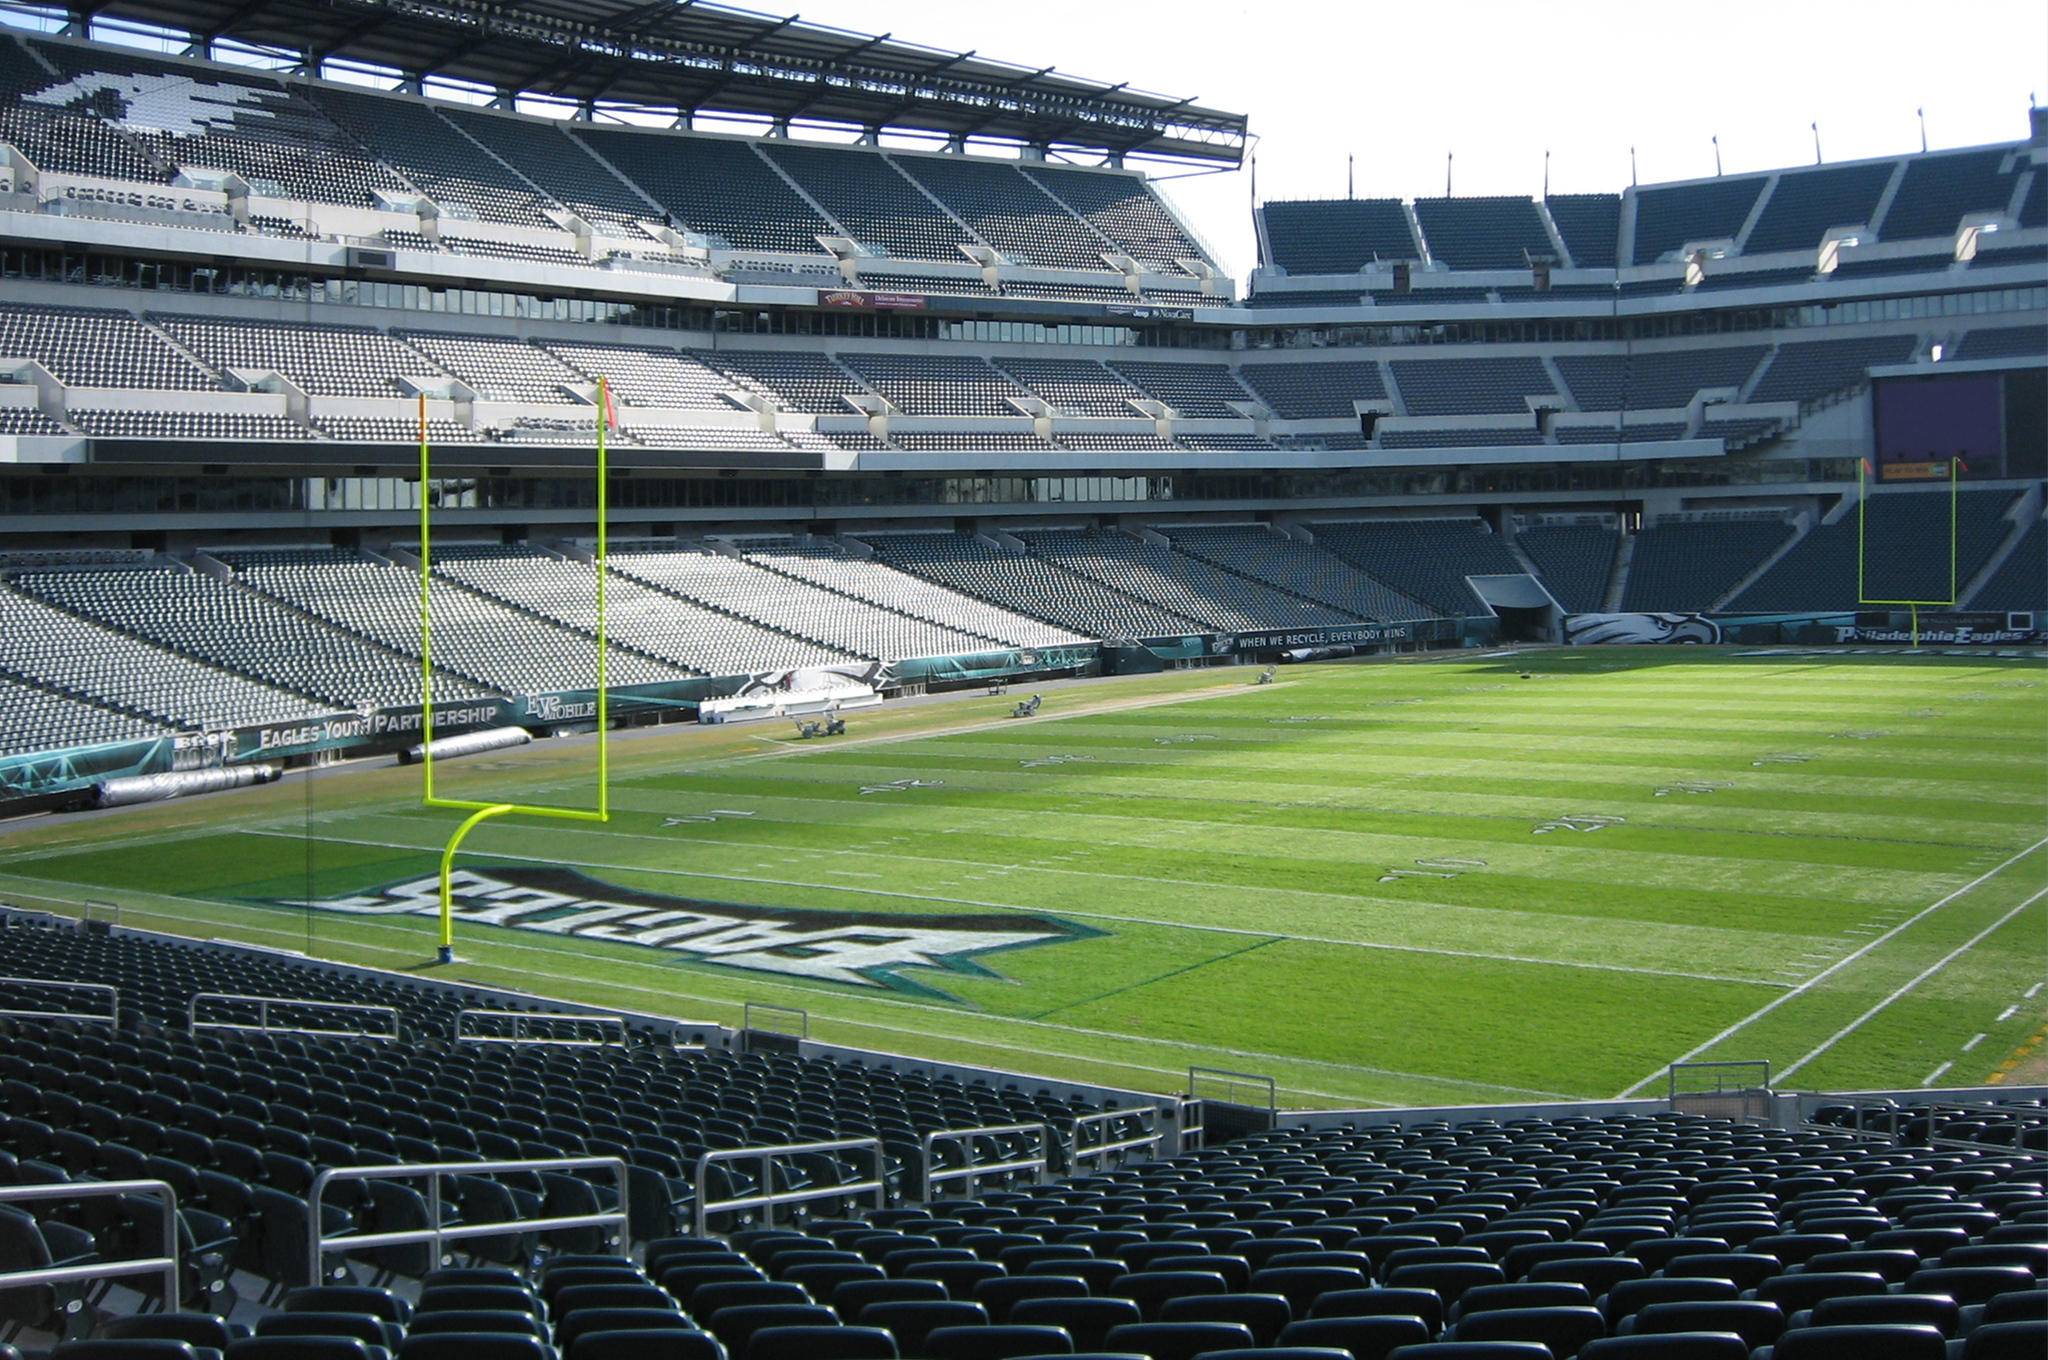 Philadelphia Eagles lead from the front in 'Green' initiatives - Coliseum